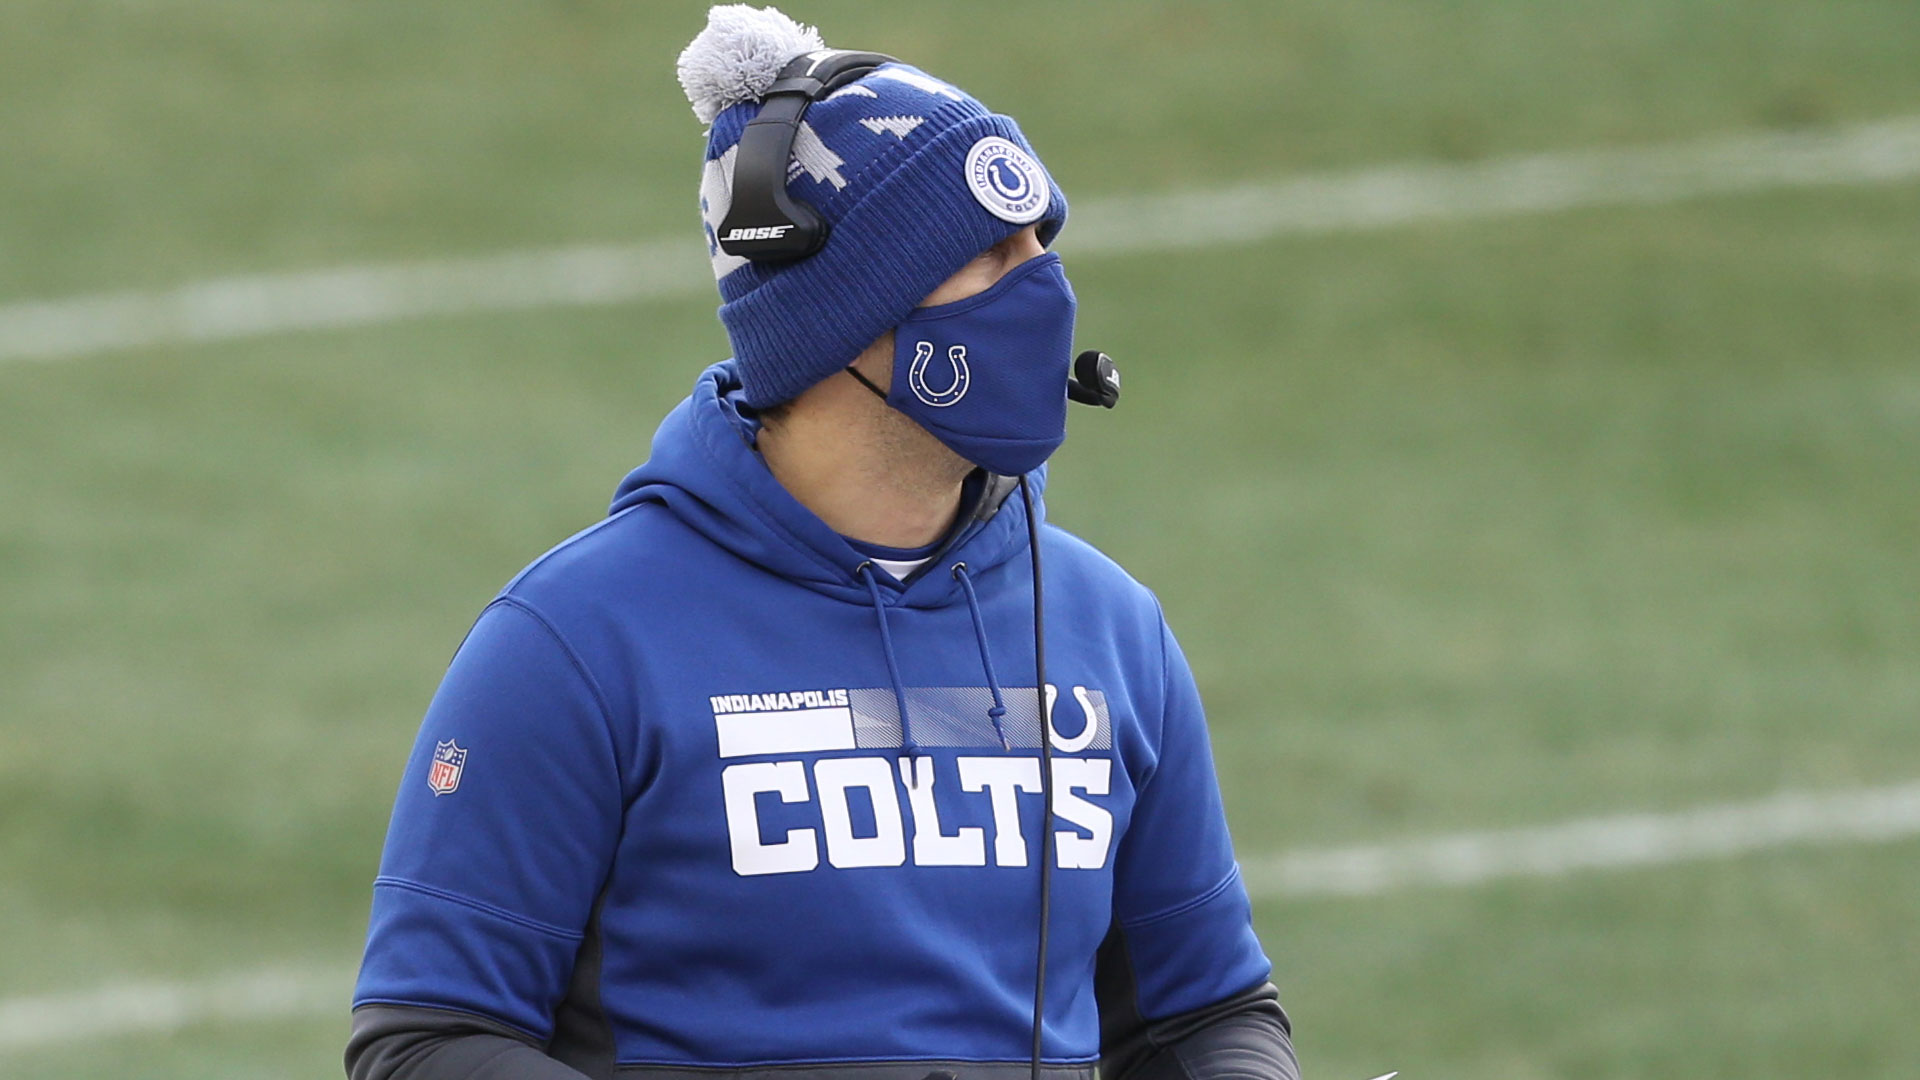 Eagles hired Colts OC Nick Sirianni to be the next head coach: source